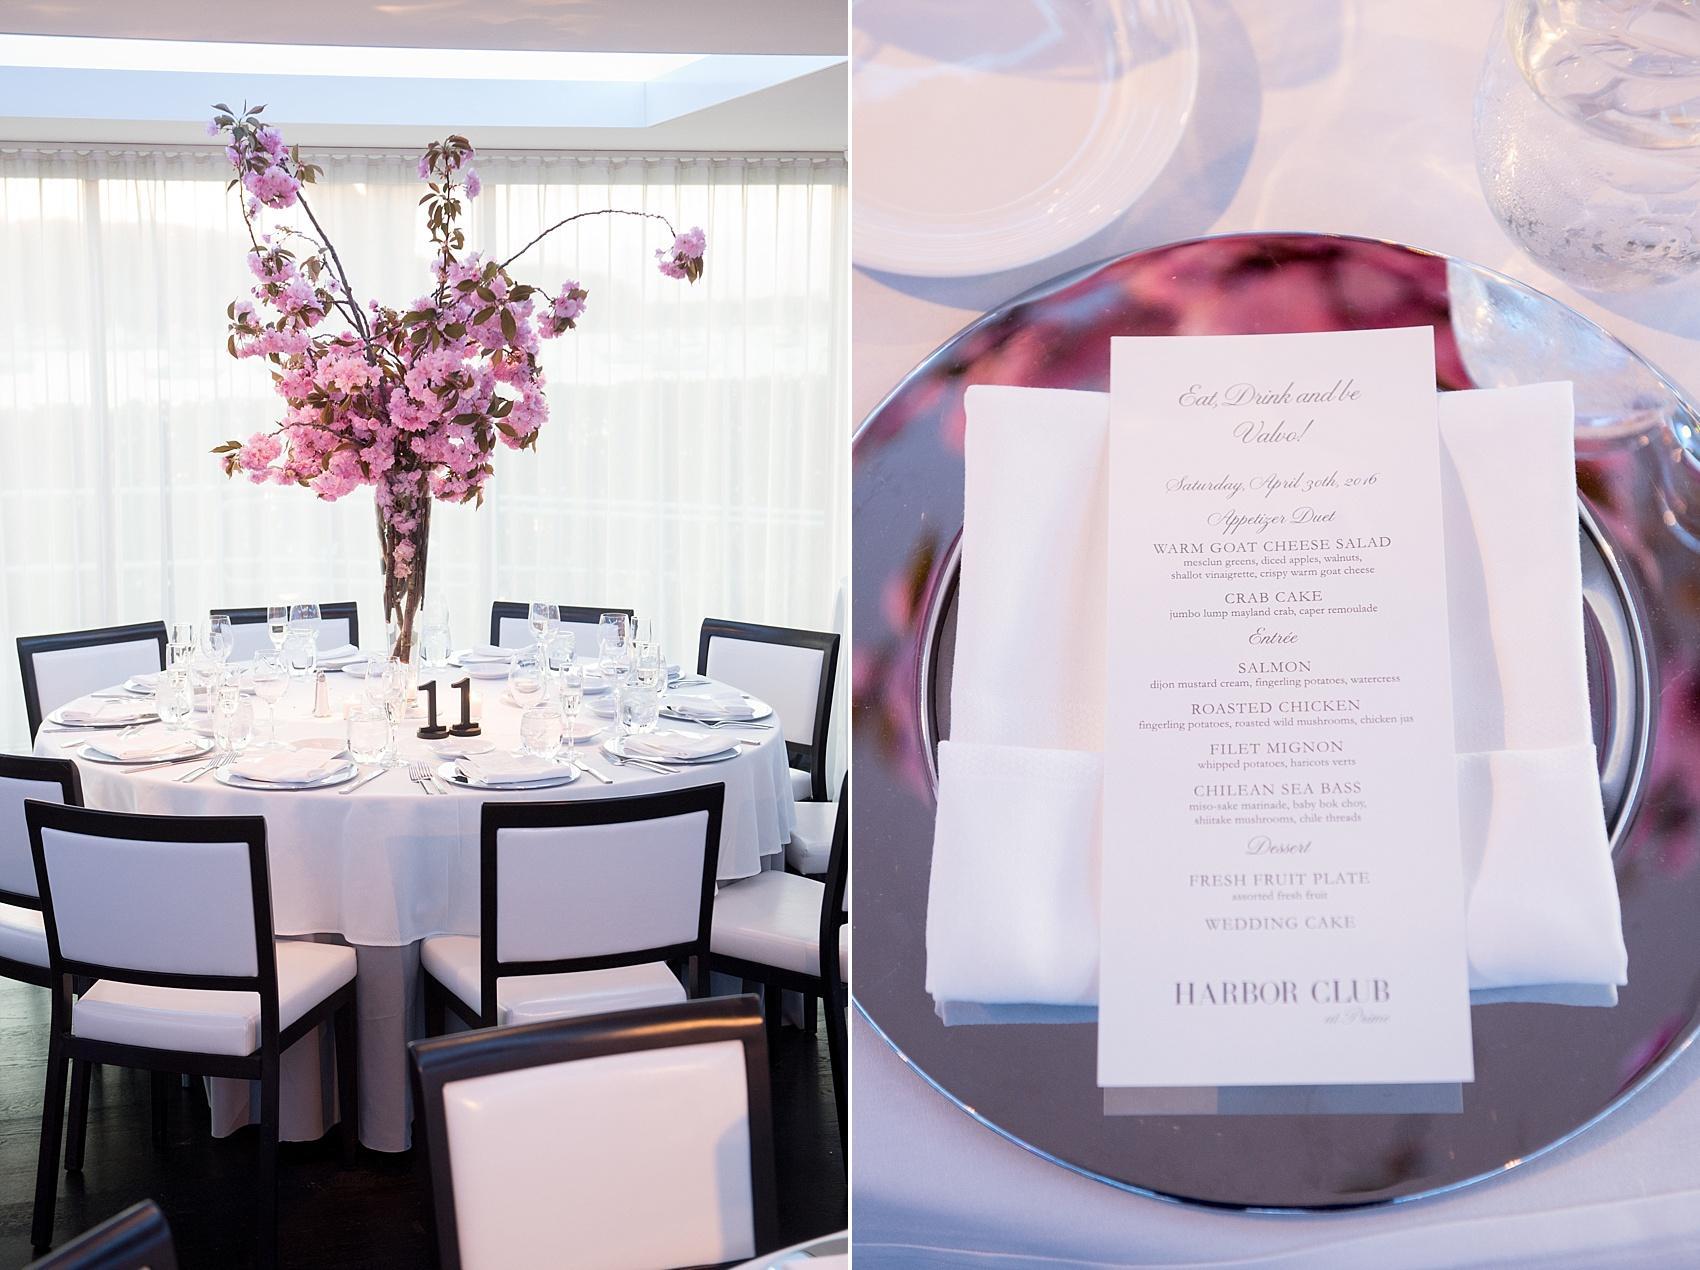 Photos by Mikkel Paige Photography for a wedding at Harbor Club on Long Island. Modern sleek reception room with cherry blossoms.